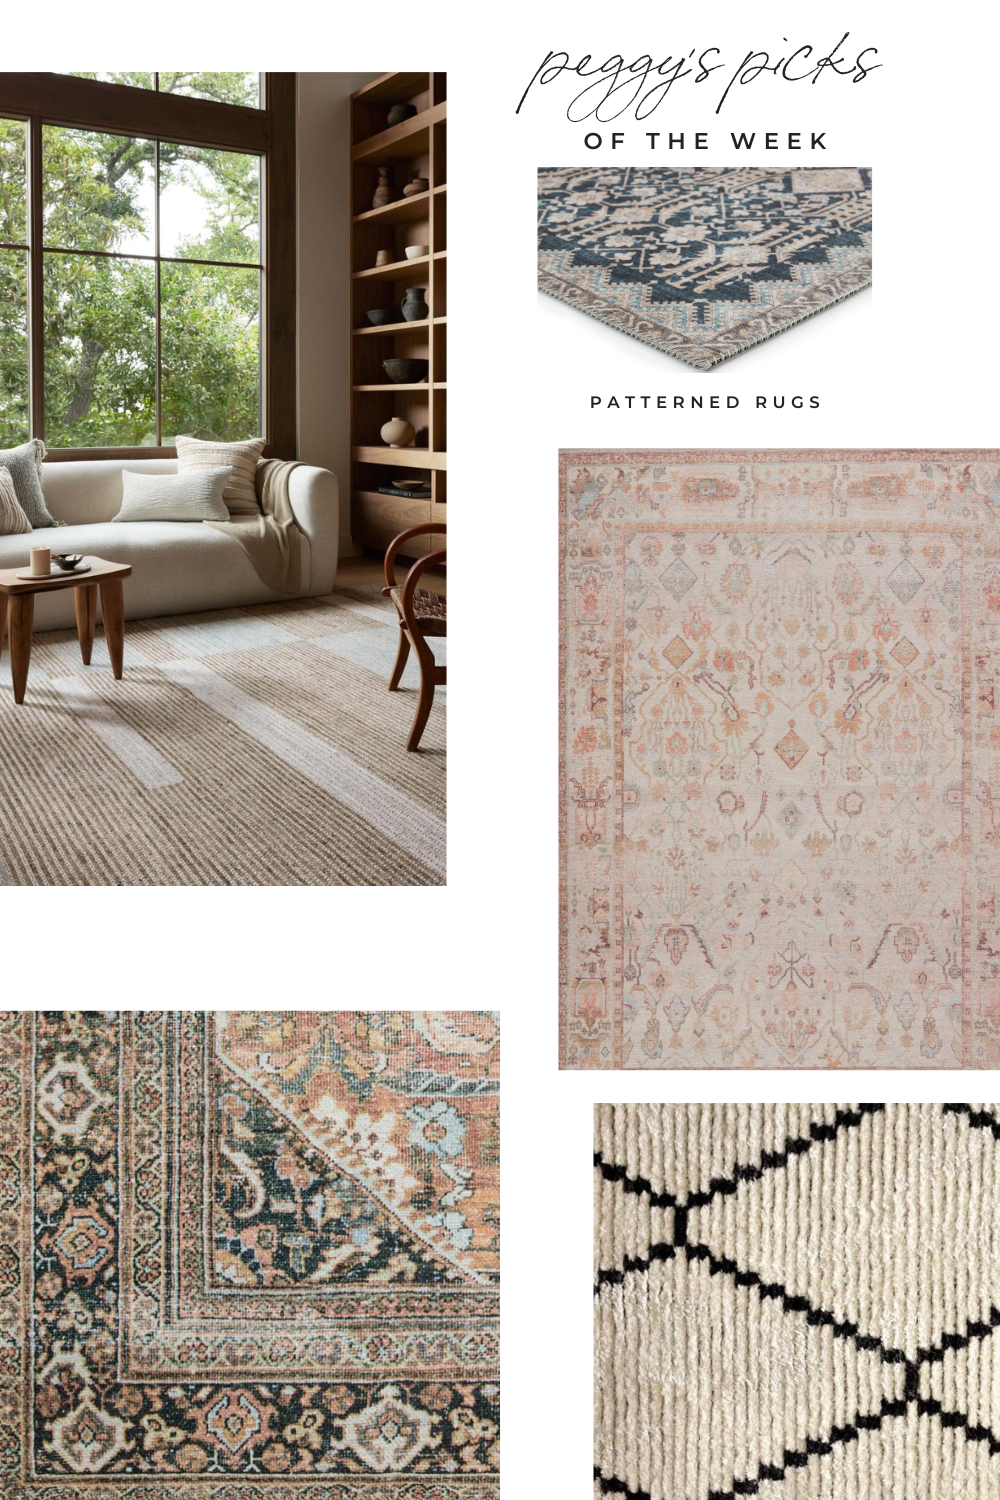 Peggy's Picks of the Week Patterned Rugs